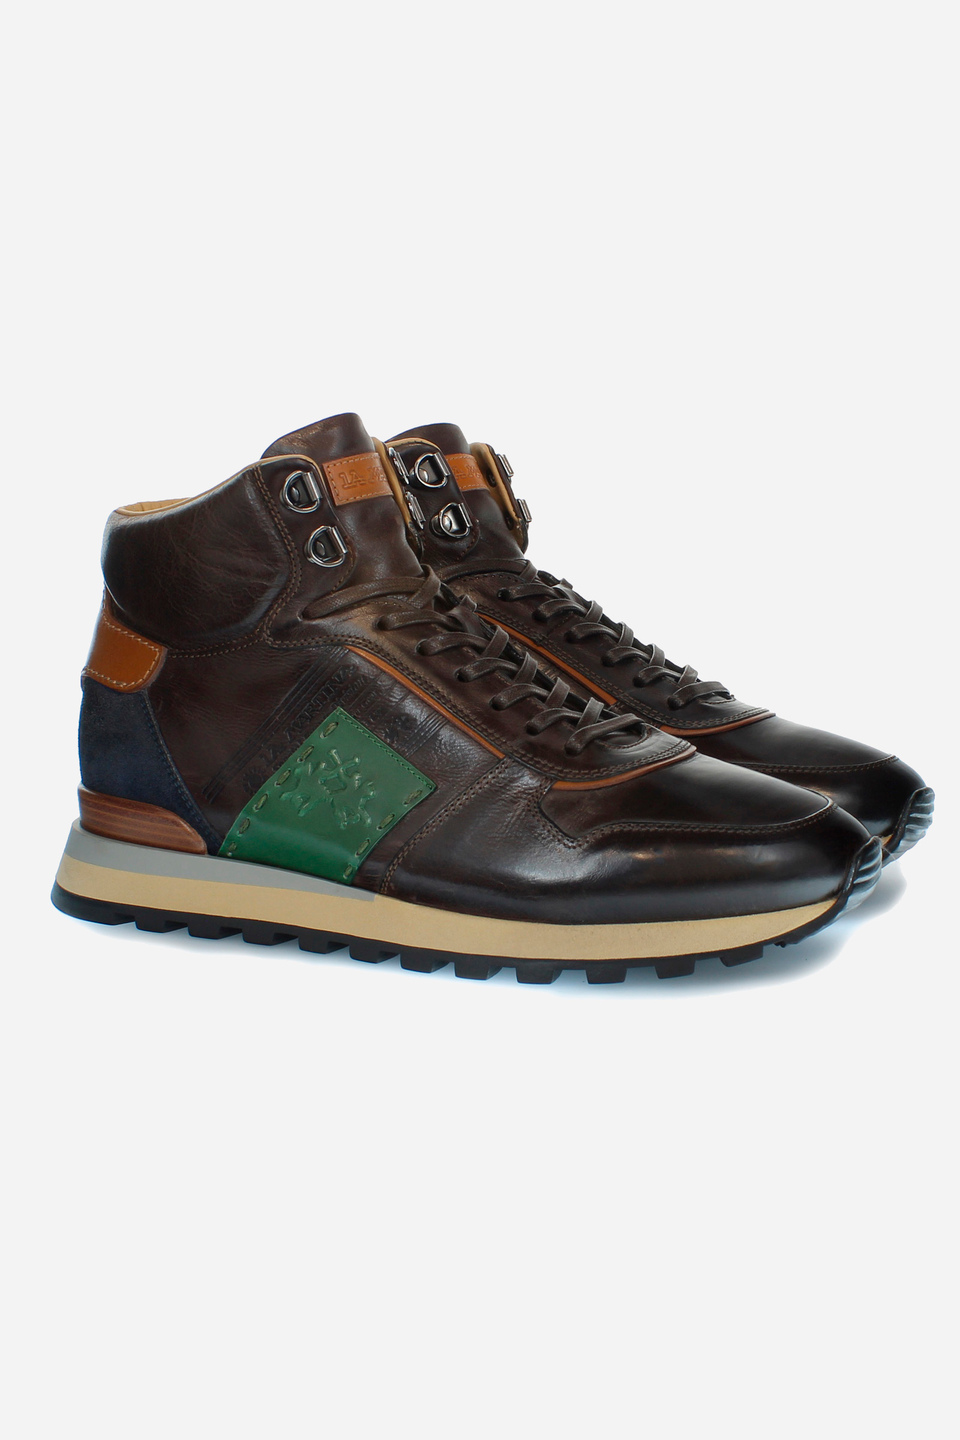 High-top men leather trainers with lining in sheepskin | La Martina - Official Online Shop